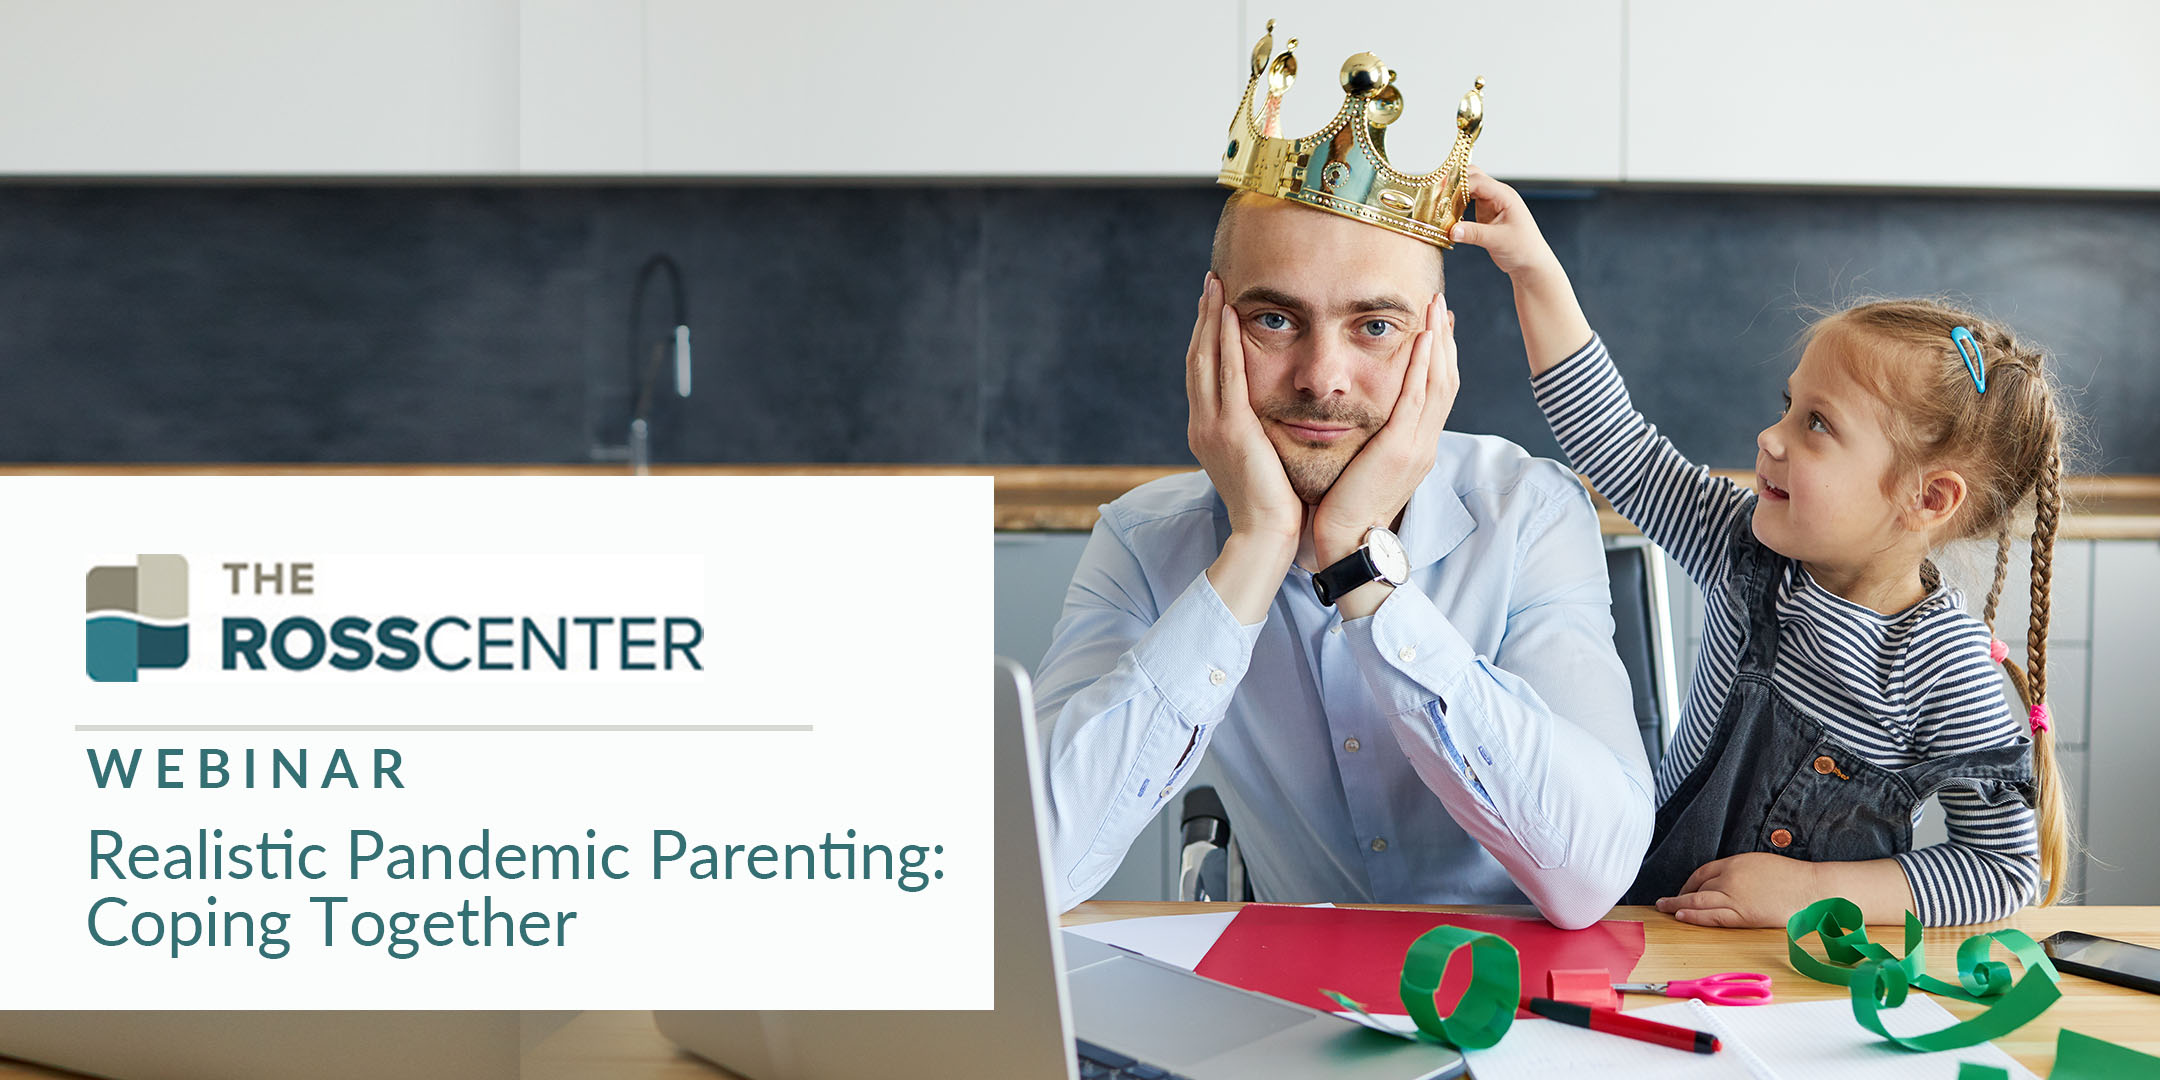 Young Girl Placing Crown on Father's Head in a Webinar Image for Realistic Pandemic Parenting: Coping Together